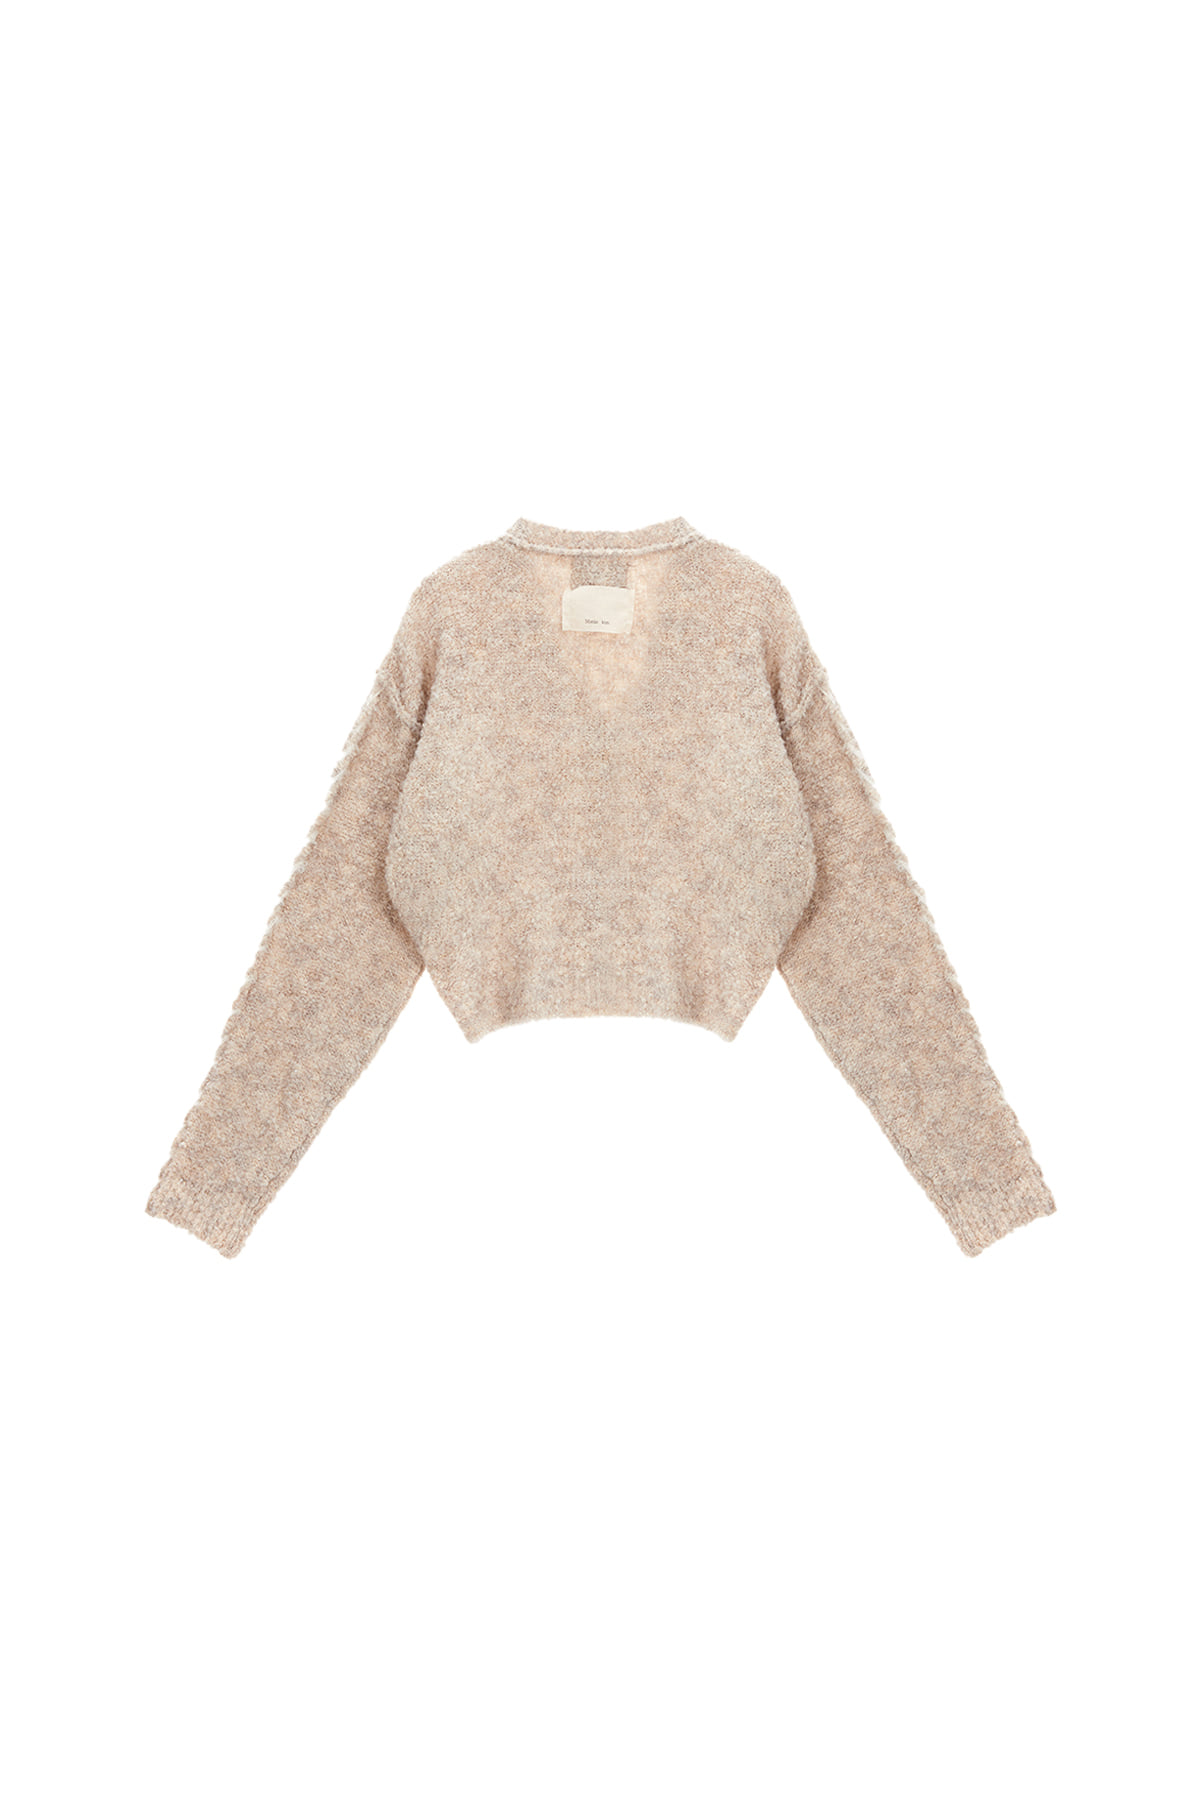 [EXCLUSIVE] SLEEVE STITCH CROP BOUCLE CARDIGAN IN BEIGE